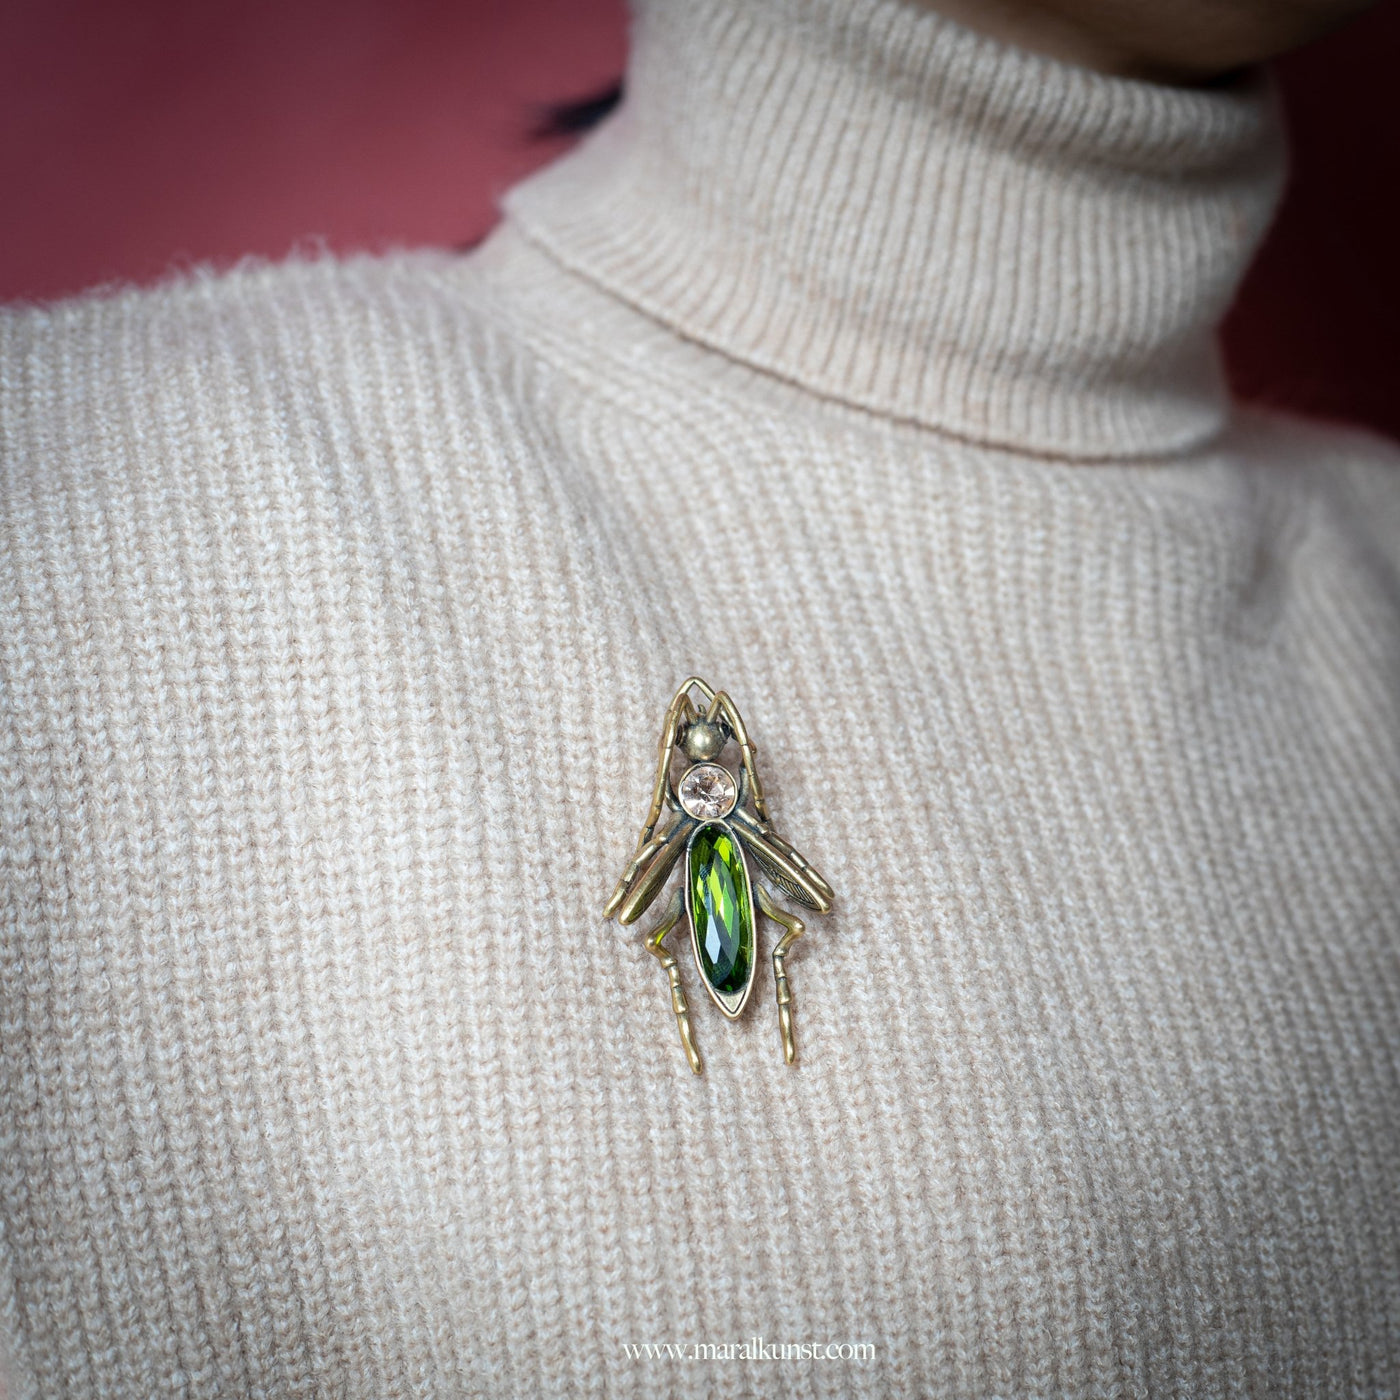 Locust Insect Brooch - Maral Kunst Jewelry